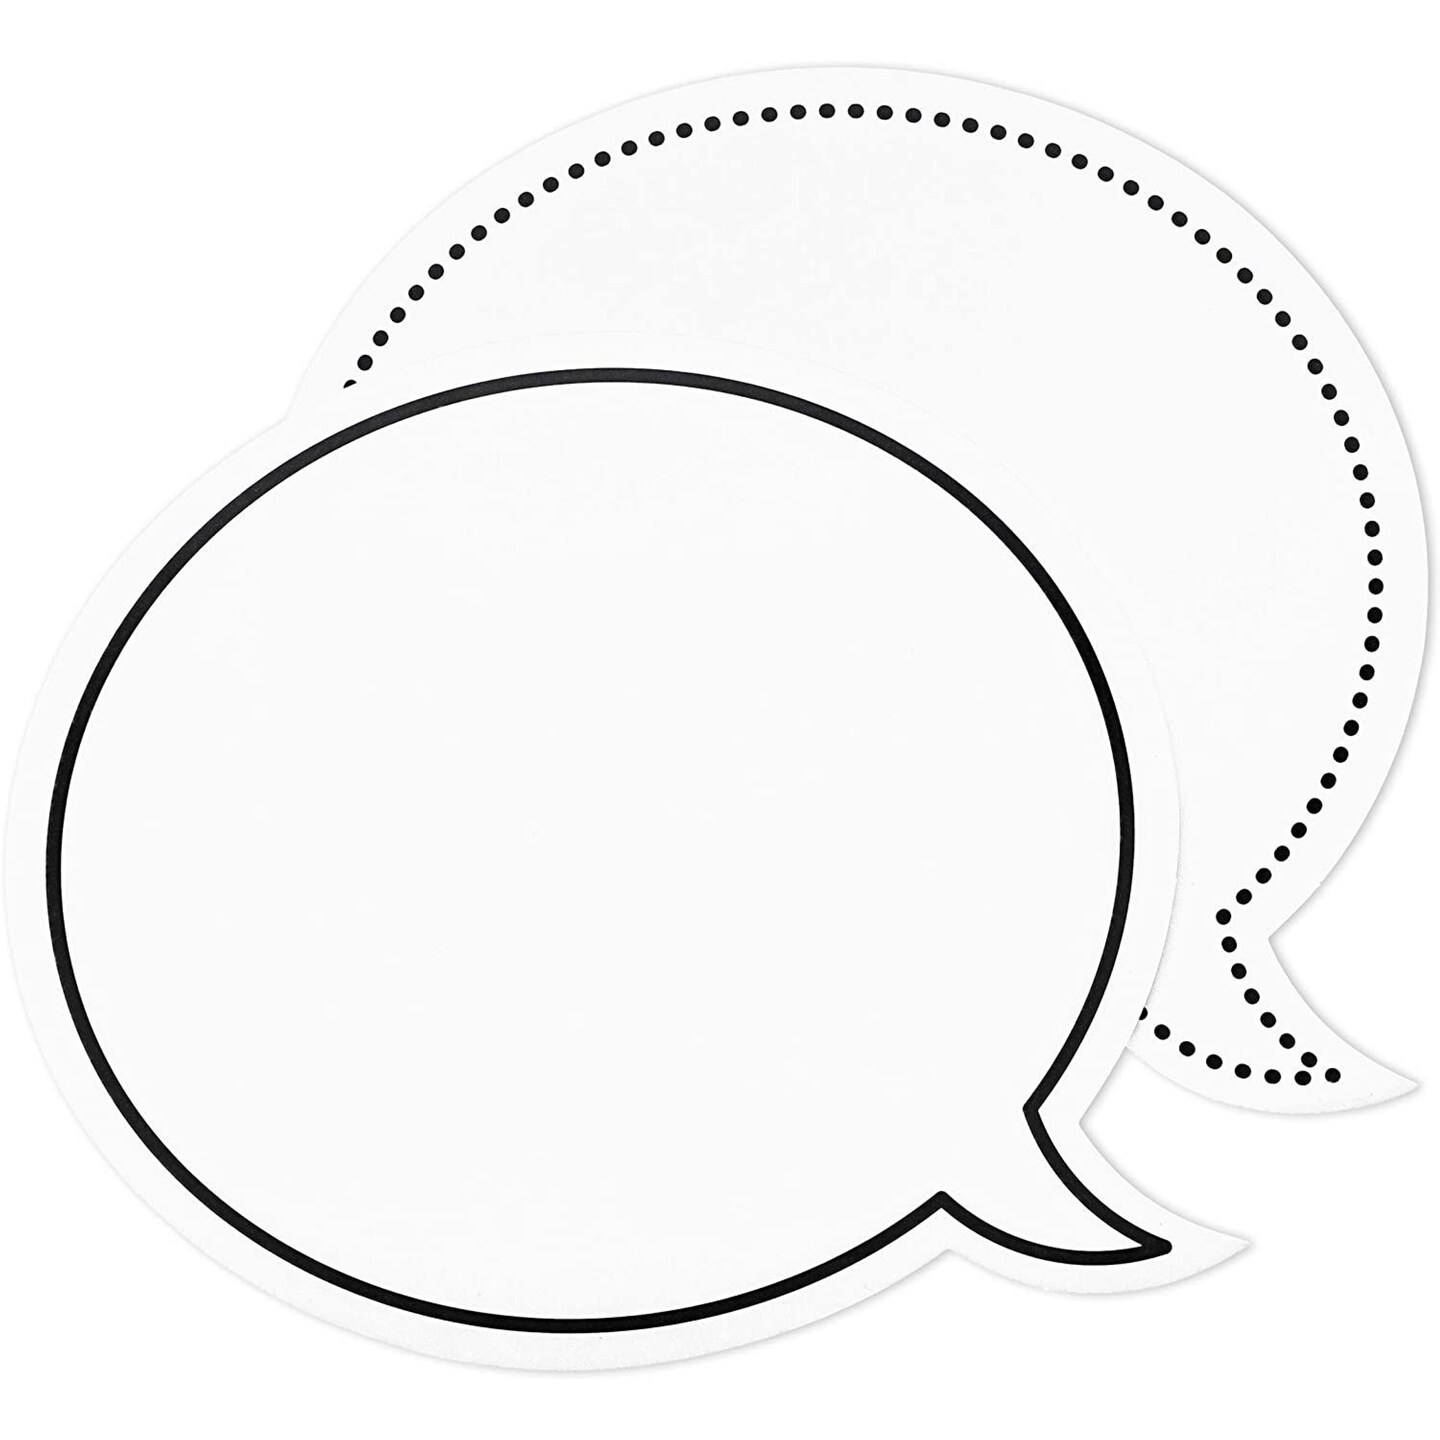 Dry Erase Speech Bubble Cutouts for Bulletin Boards (9 x 8 Inches, 48 Pack)